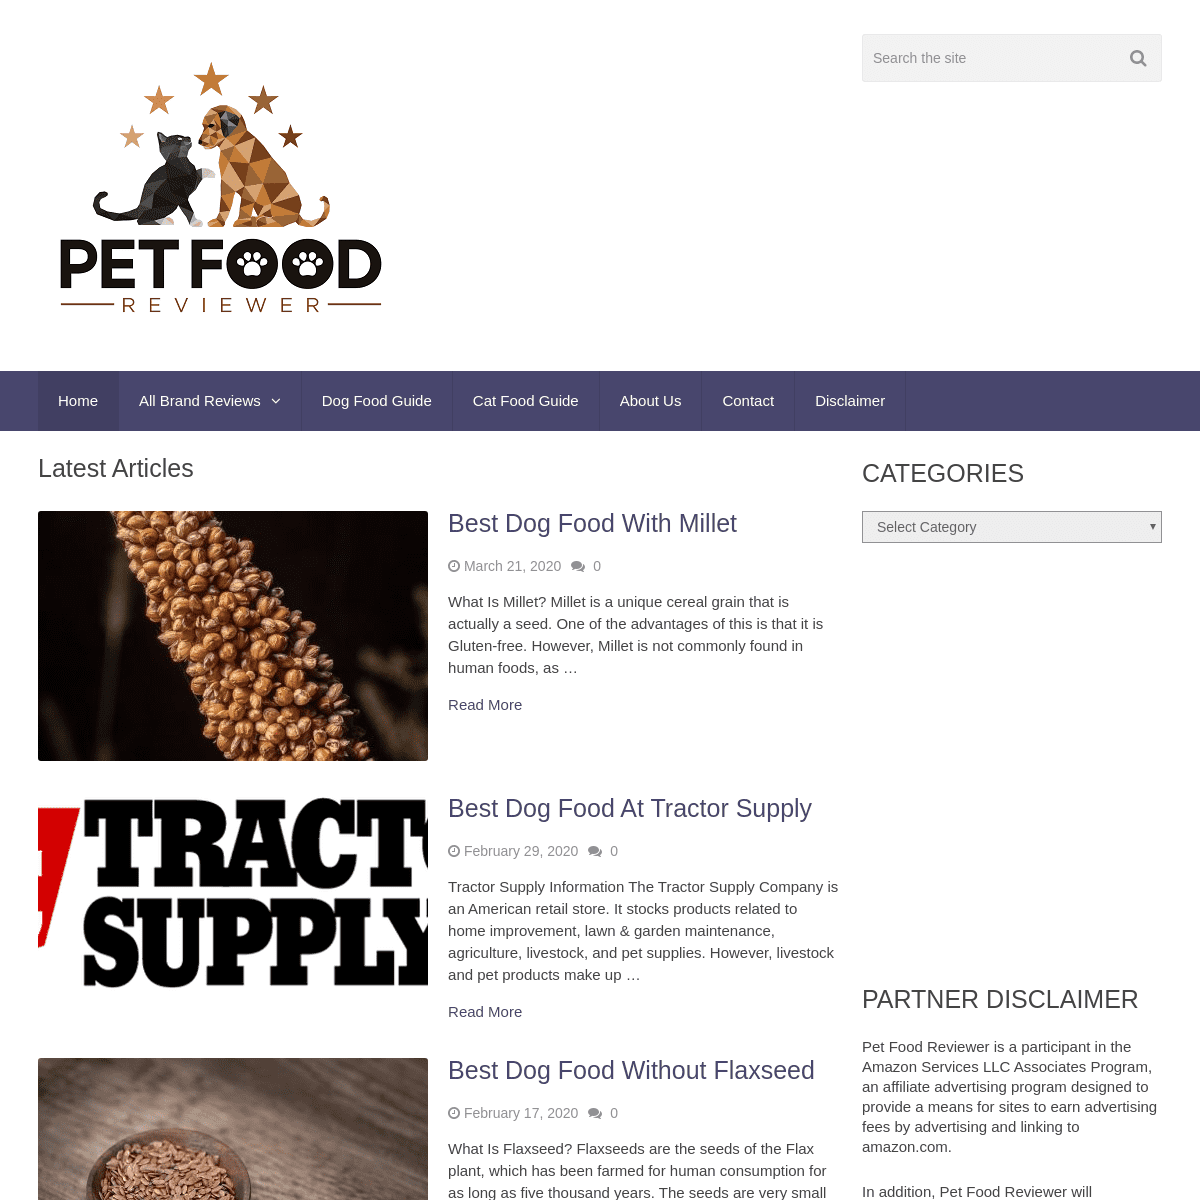 A complete backup of petfoodreviewer.com